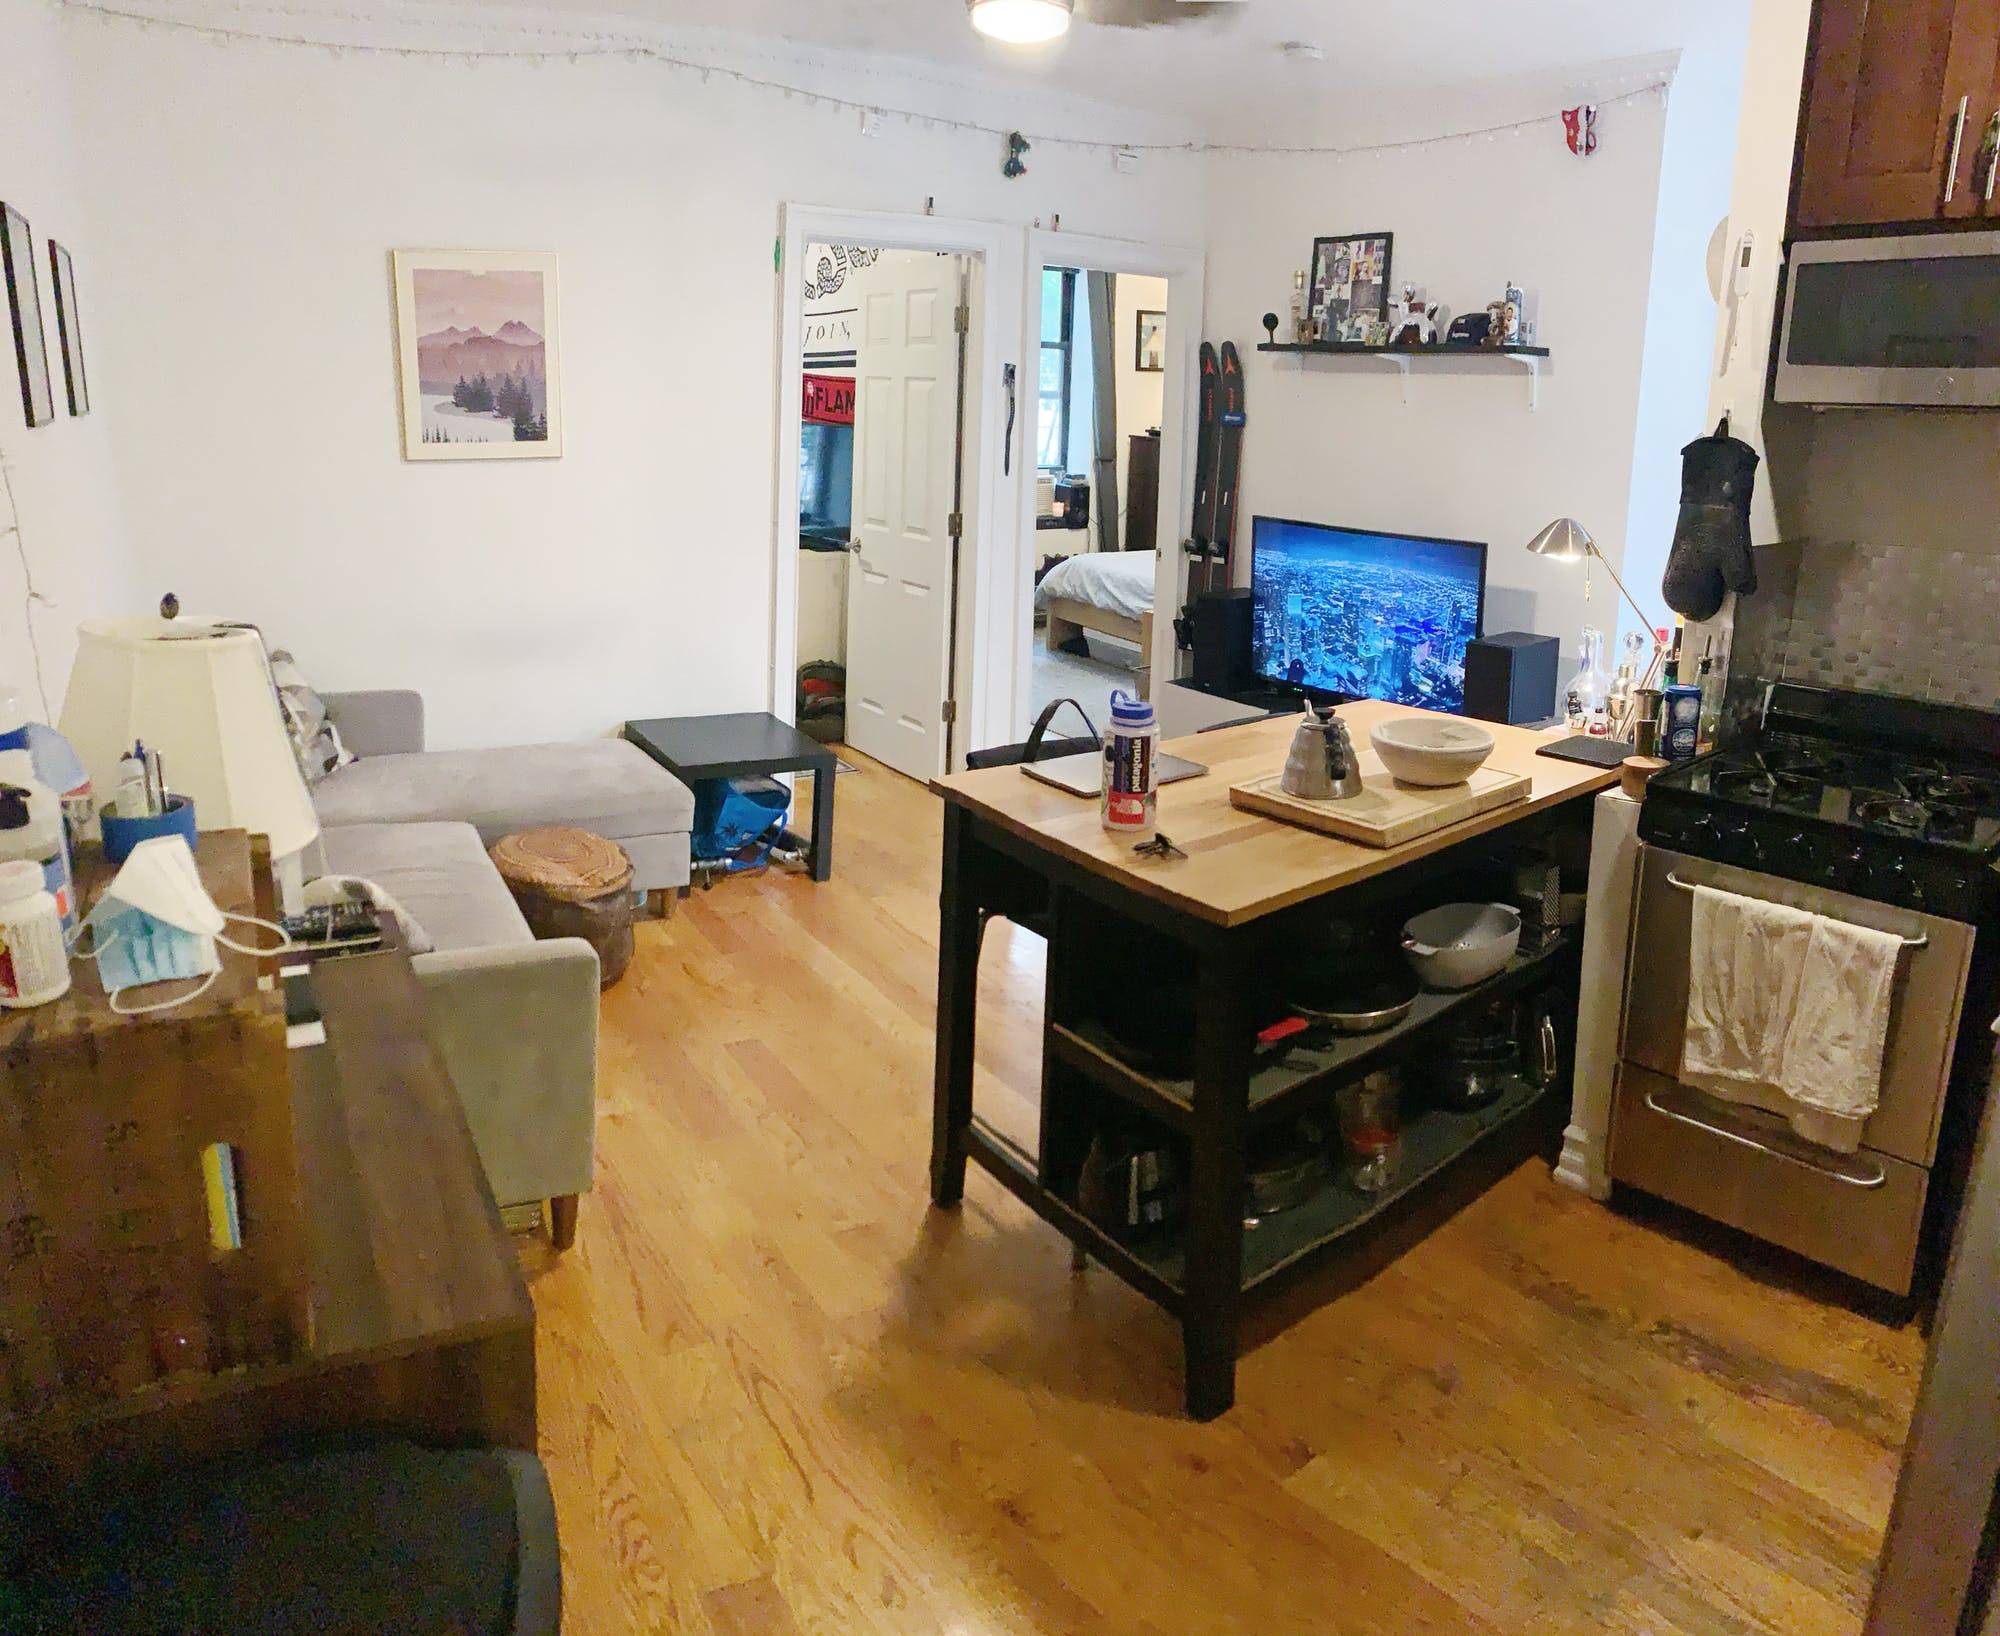 VIDEO TOUR AVAILABLE PLEASE INQUIRE WITH JAMES Welcome to 250 Pacific Street, a newly renovated building on a tree lined street surrounded by brownstones in beautiful Cobble Hill.